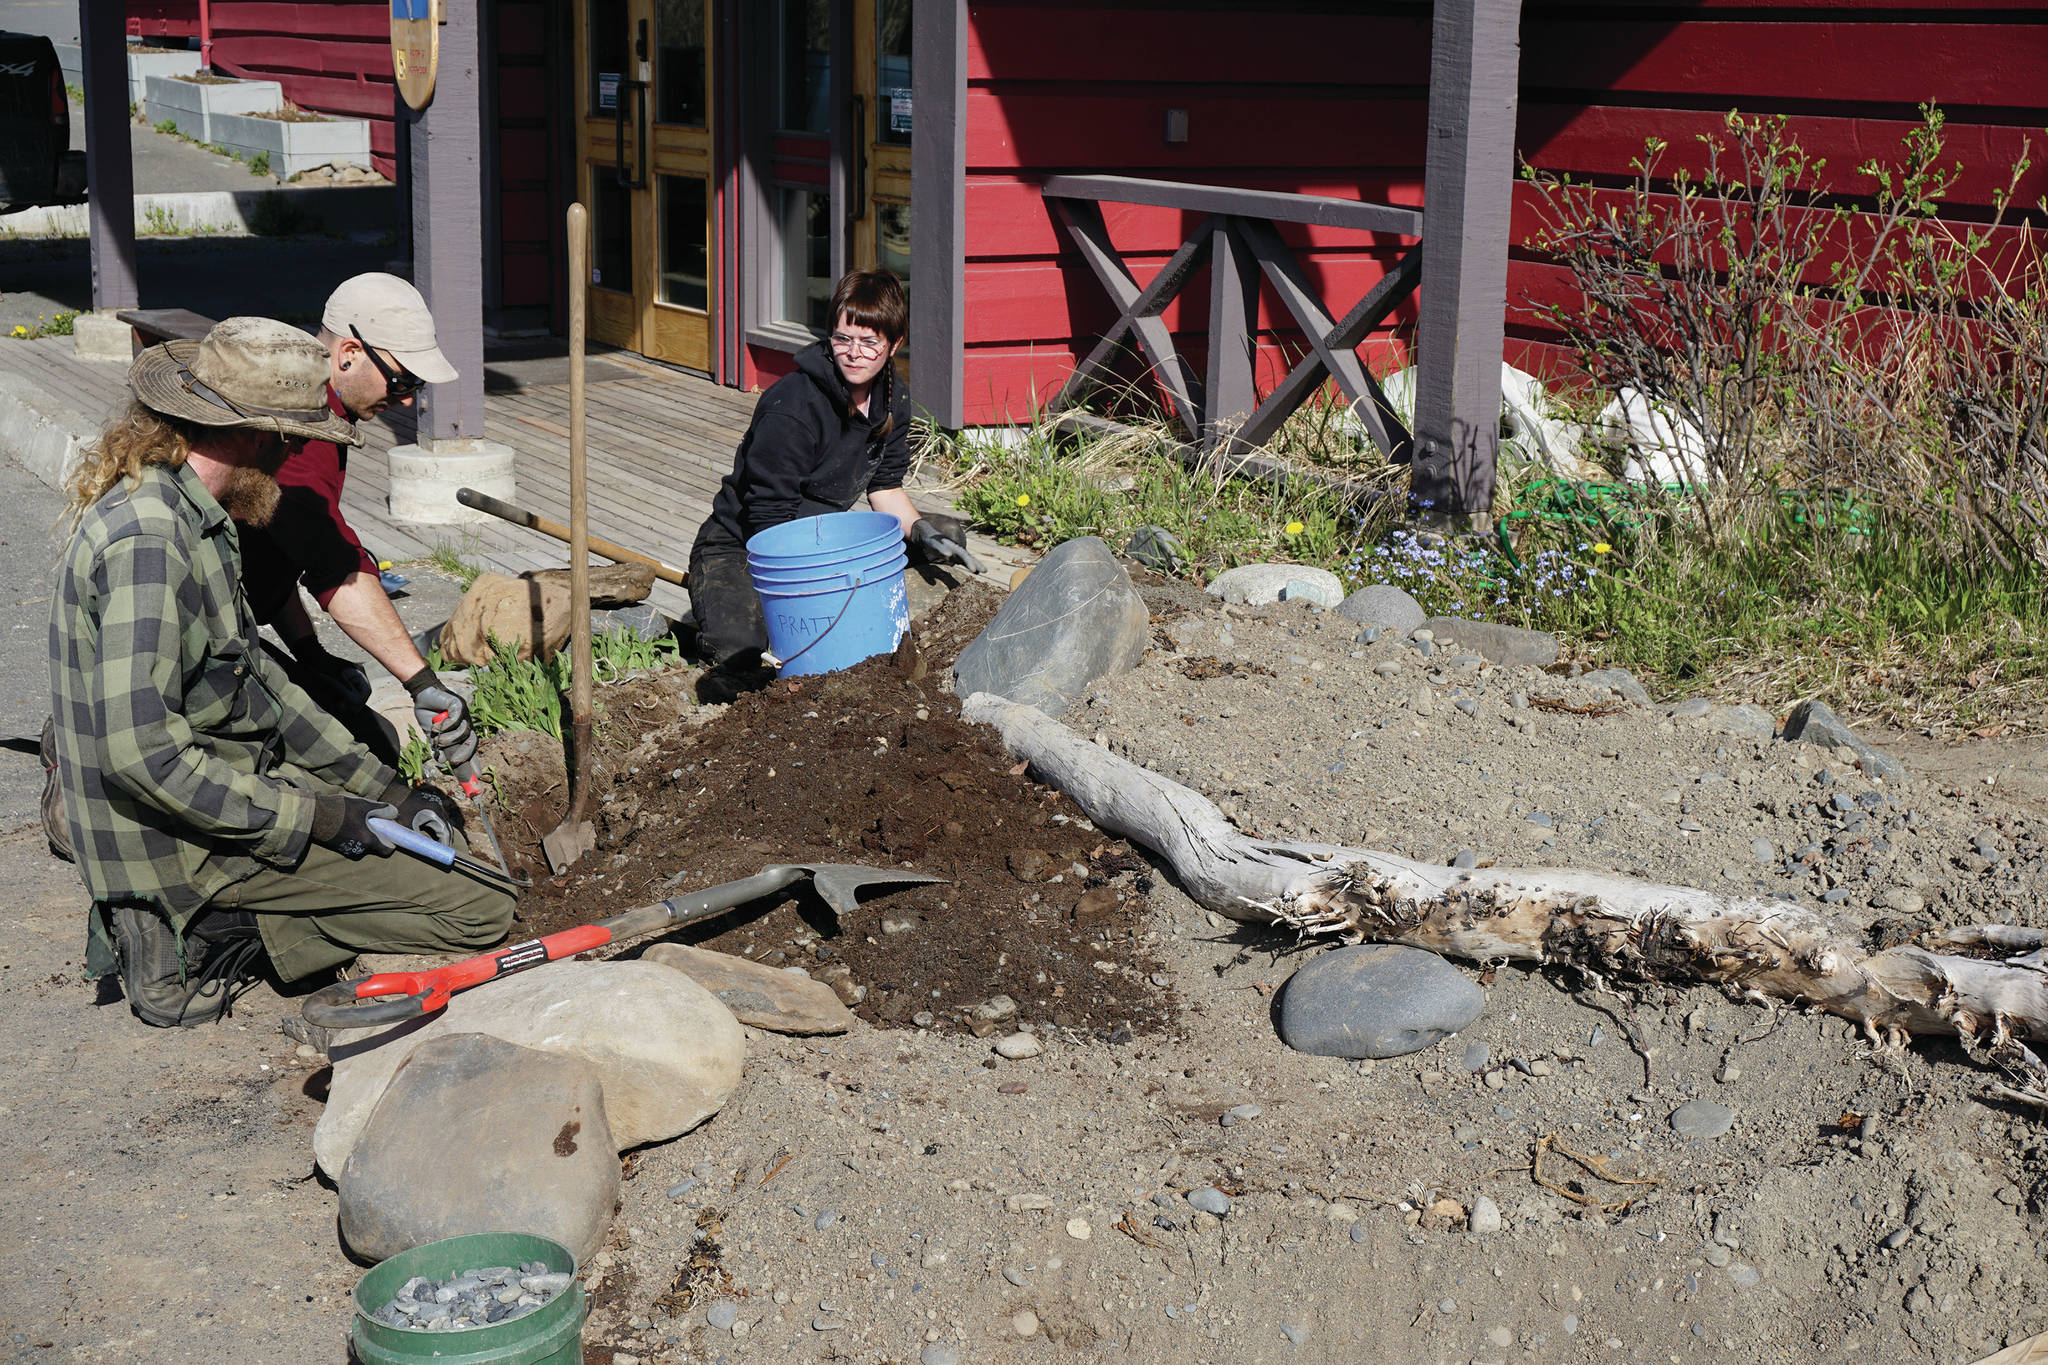 Pratt Museum botanical gardens curator Yarrow Hinnant, left, works with Chase Warren, center, and Gavia Angell, right, on renovating the gardens on Tuesday, May 18, 2021, at the museum in Homer, Alaska. (Photo by Michael Armstrong/Homer News)